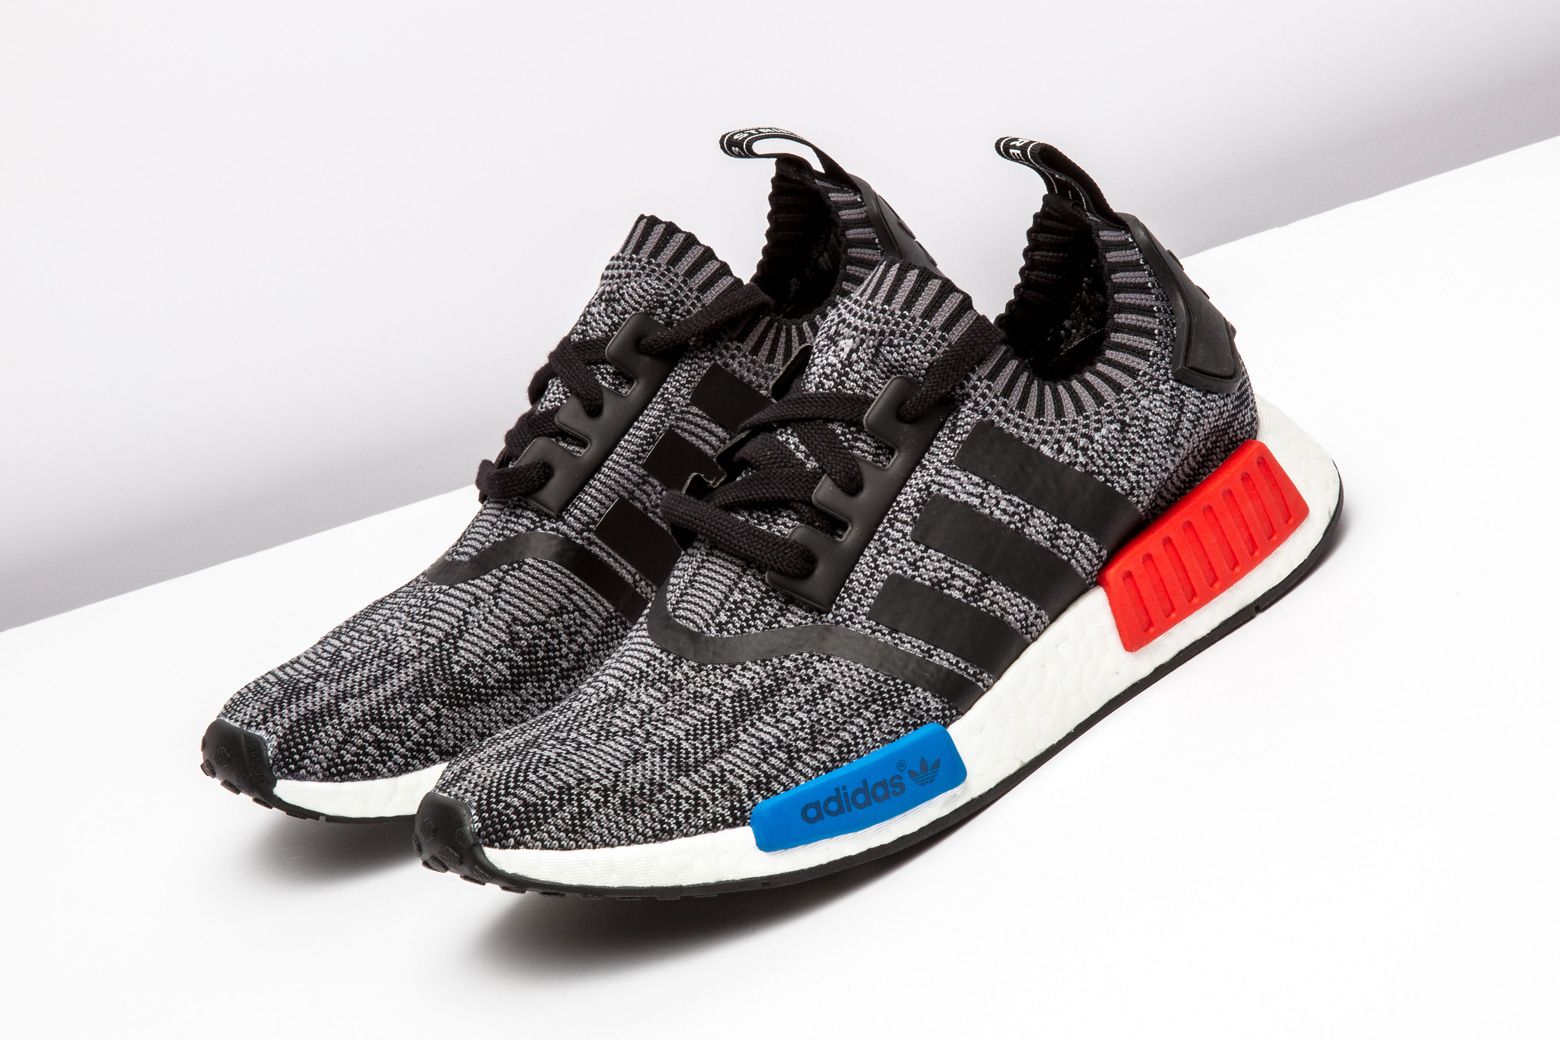 Adidas NMD_R1 Friends and Family